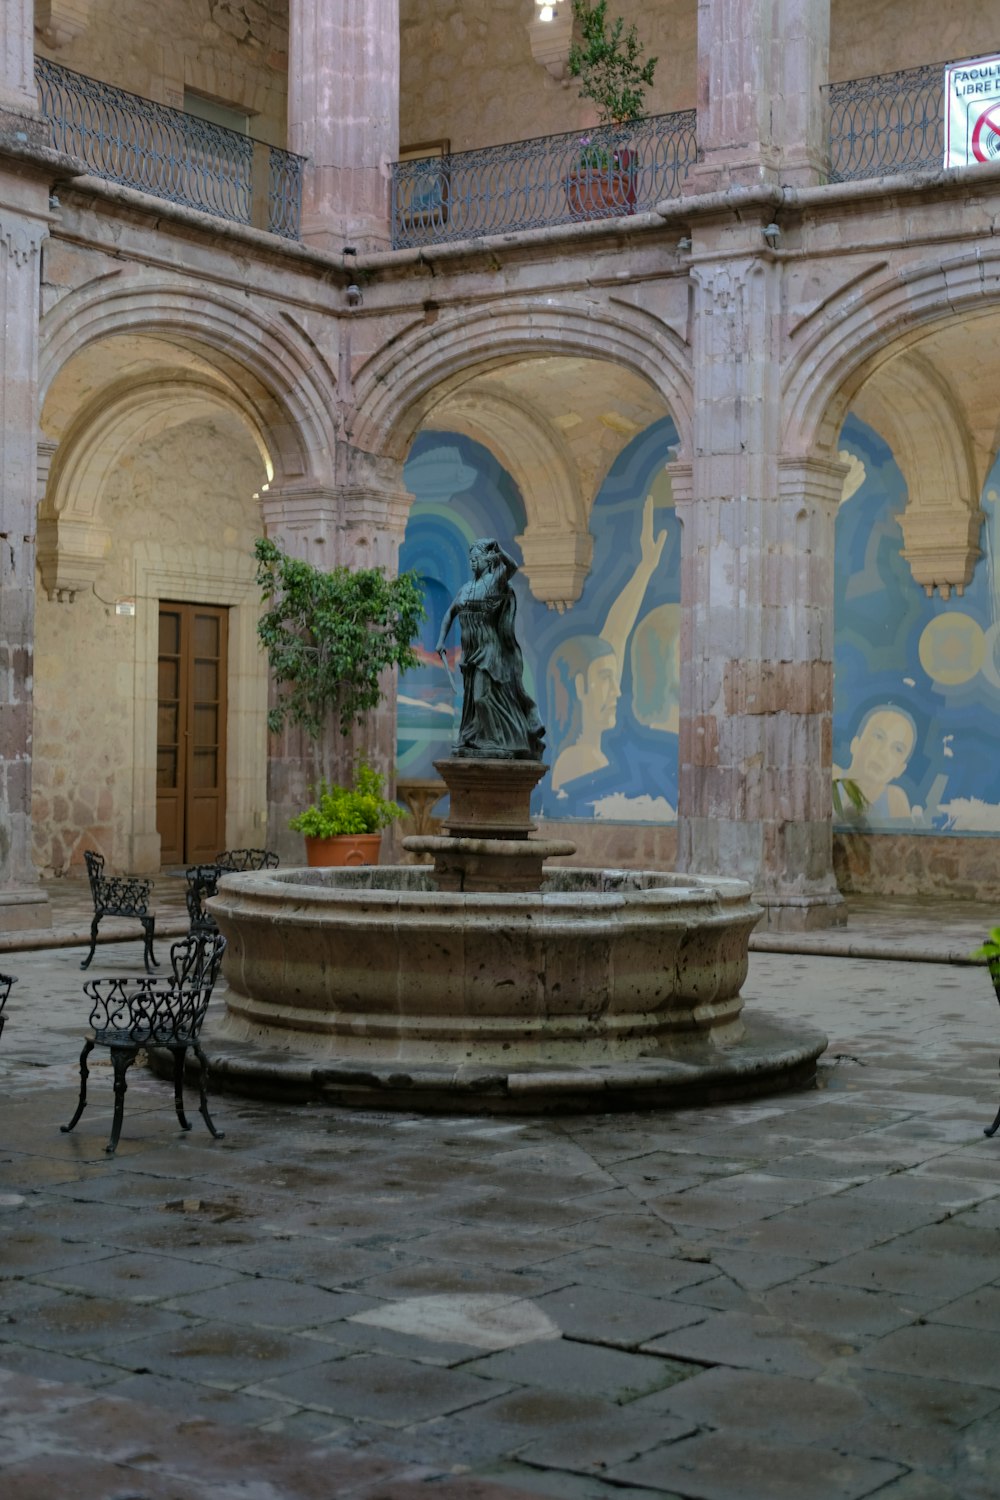 a courtyard with a fountain and benches in it